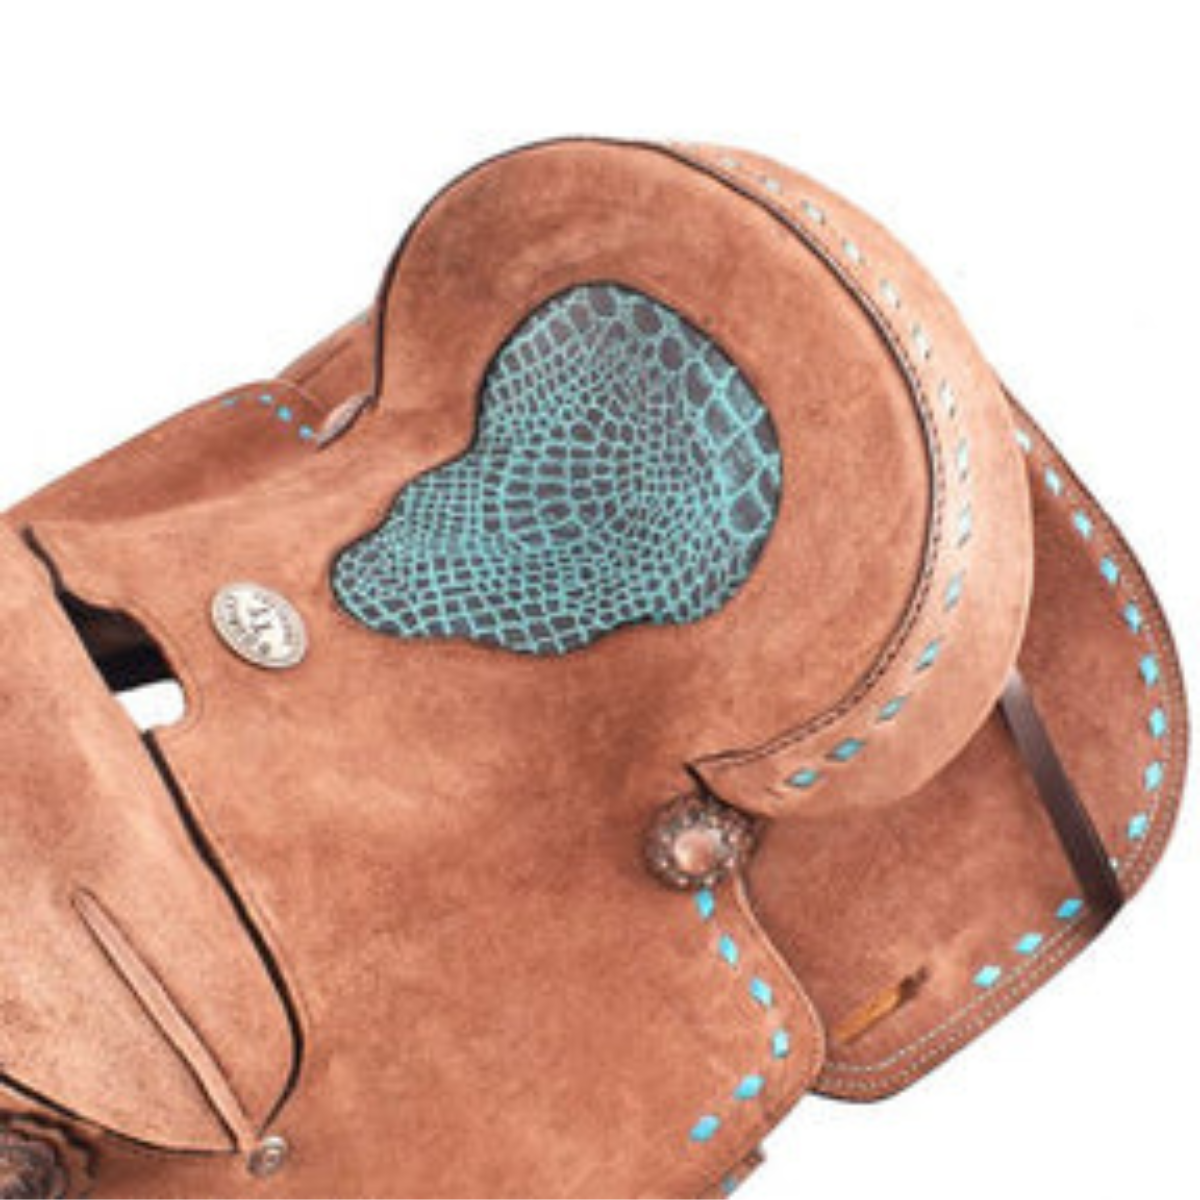 12", 13" DOUBLE T  ROUGHOUT BARREL SADDLE WITH TURQUOISE SEAT - Double T Saddles